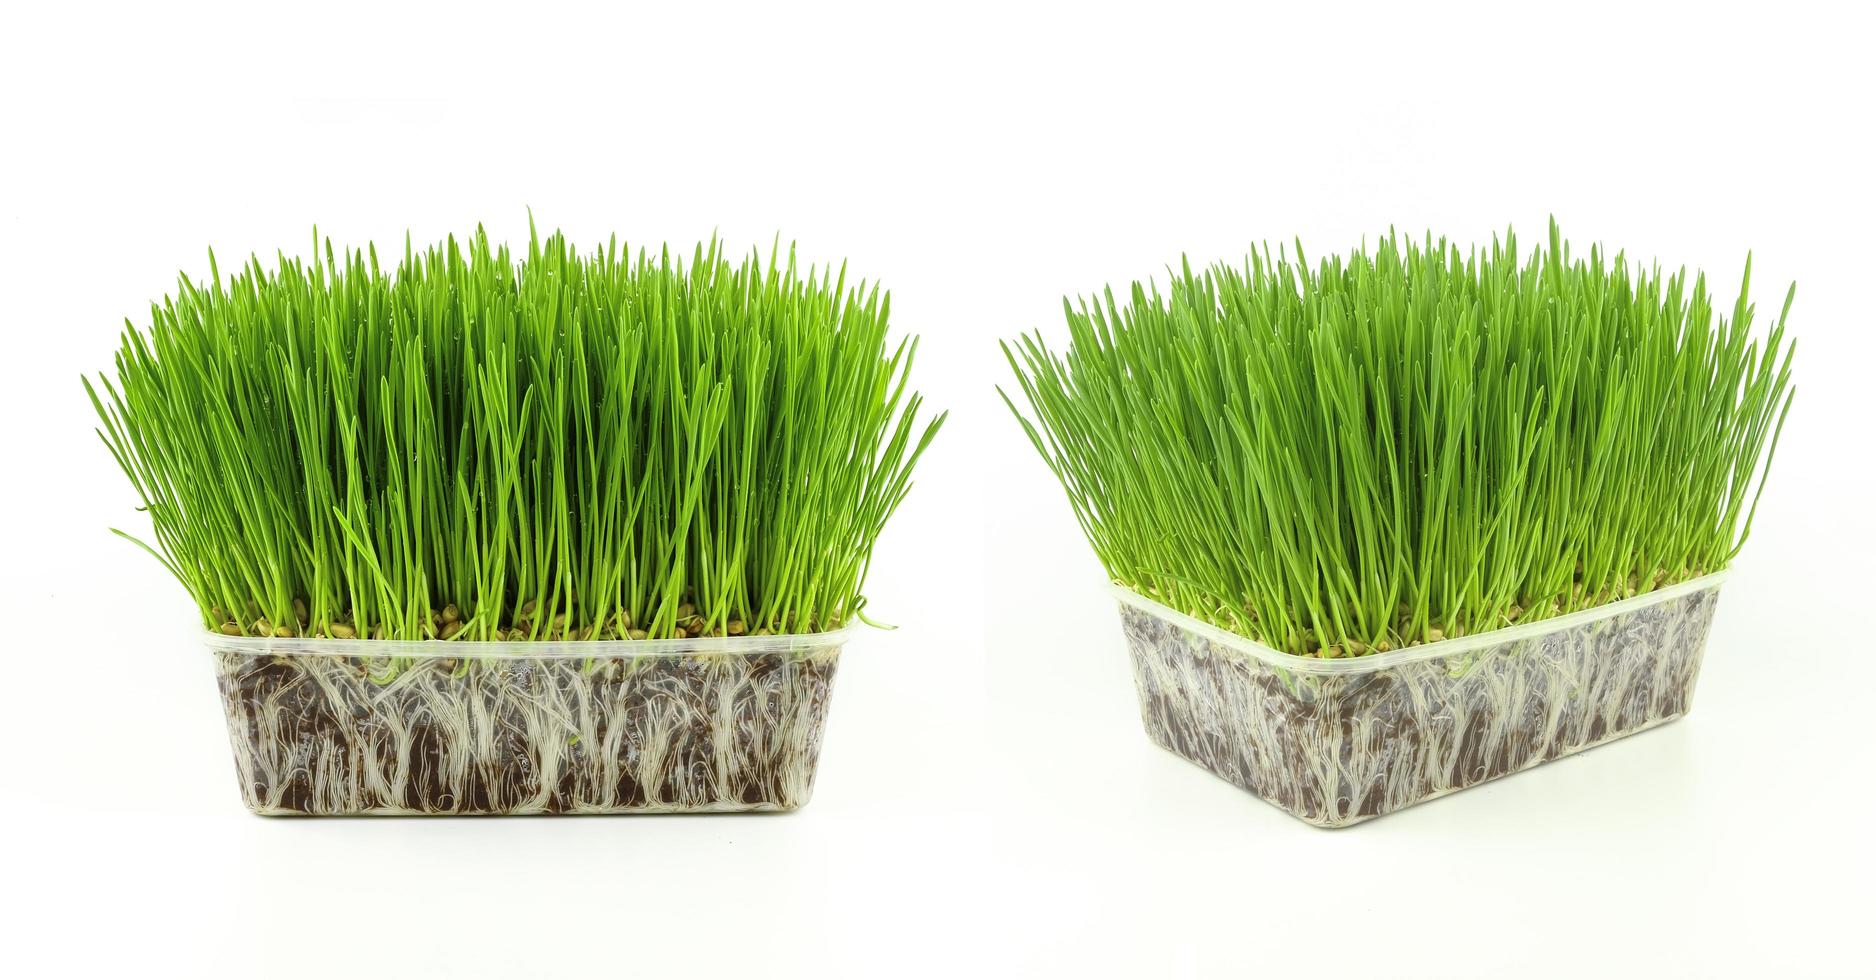 wheat grass growing in white tray photo